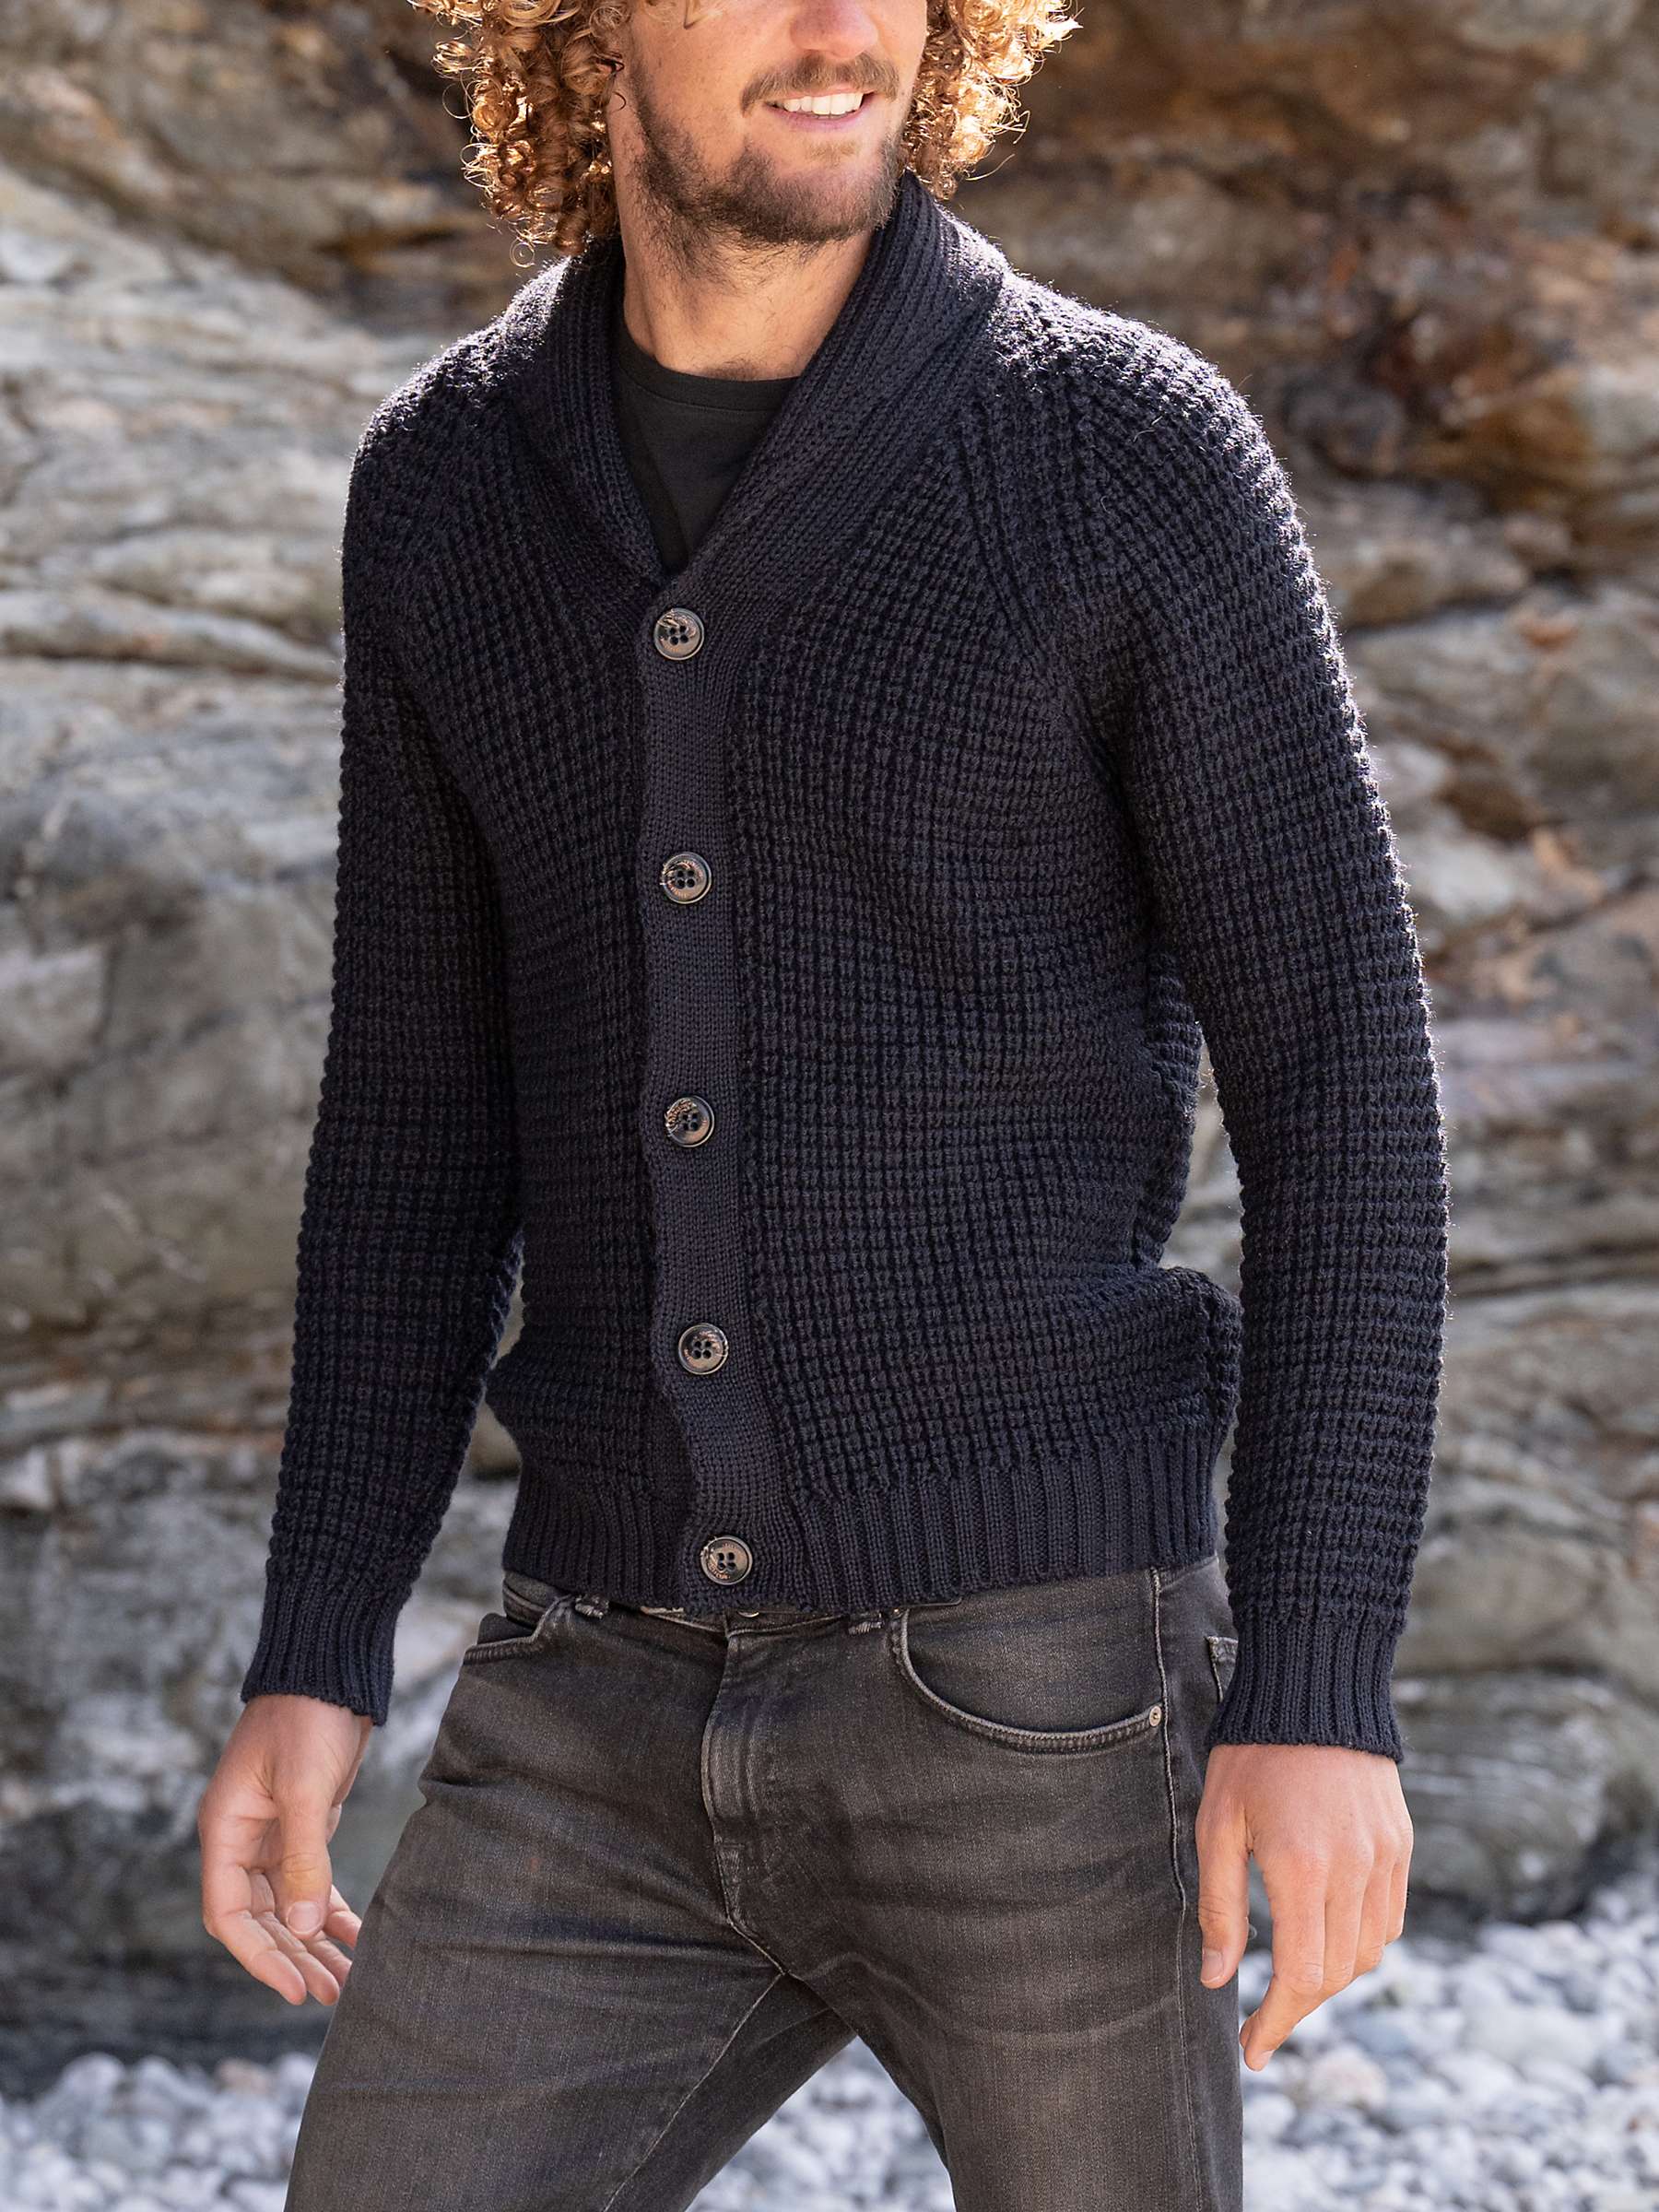 Buy Celtic & Co. Wool Waffle Stitch Cardigan Online at johnlewis.com